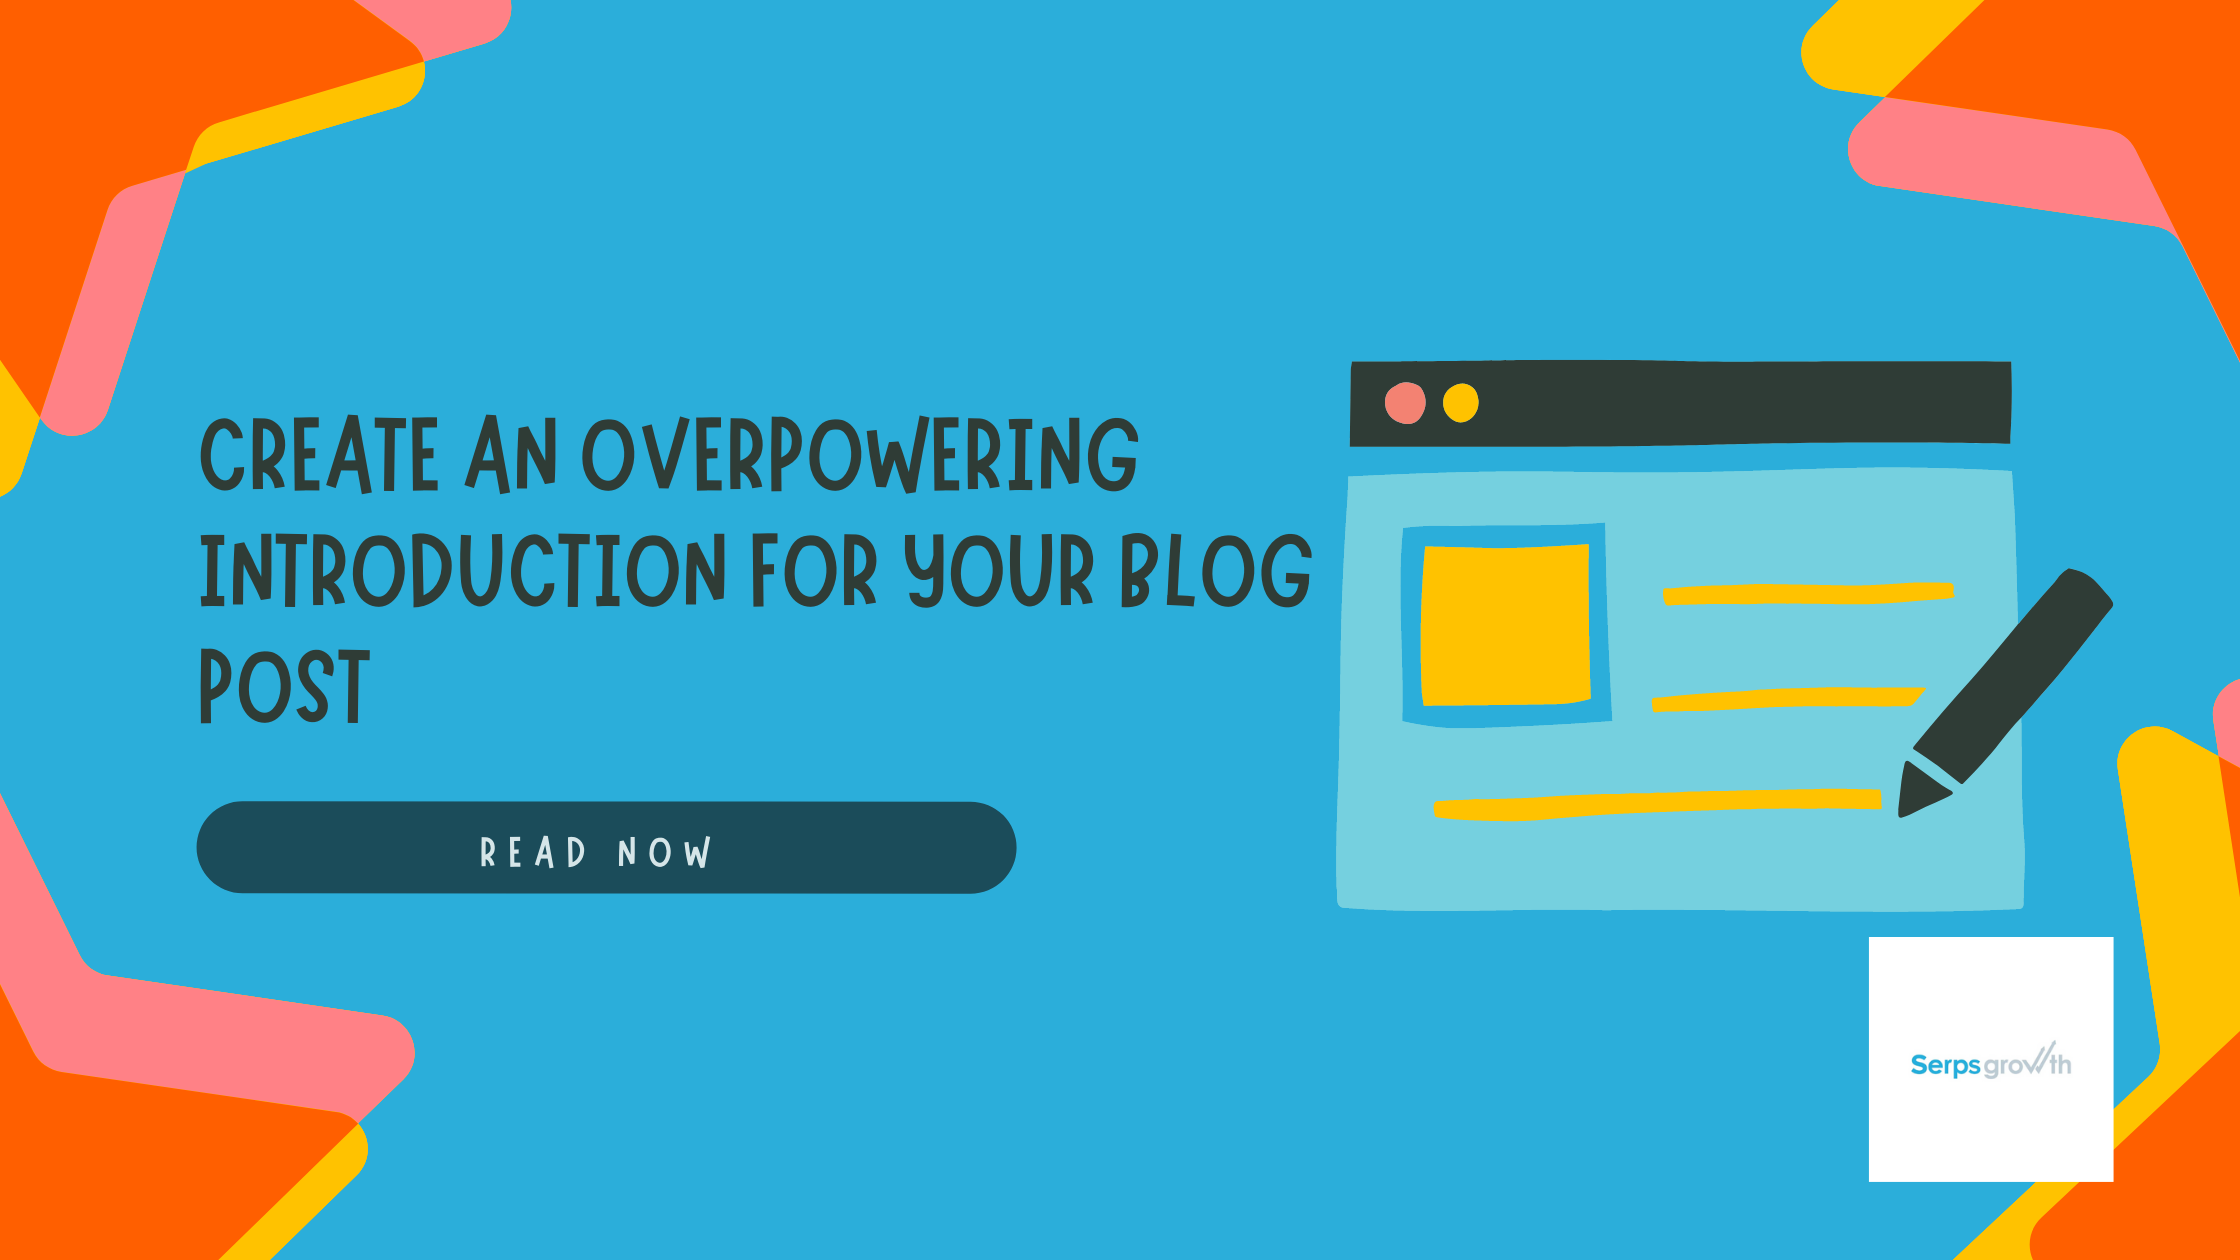 Overpowering Introduction for Your Blog Post